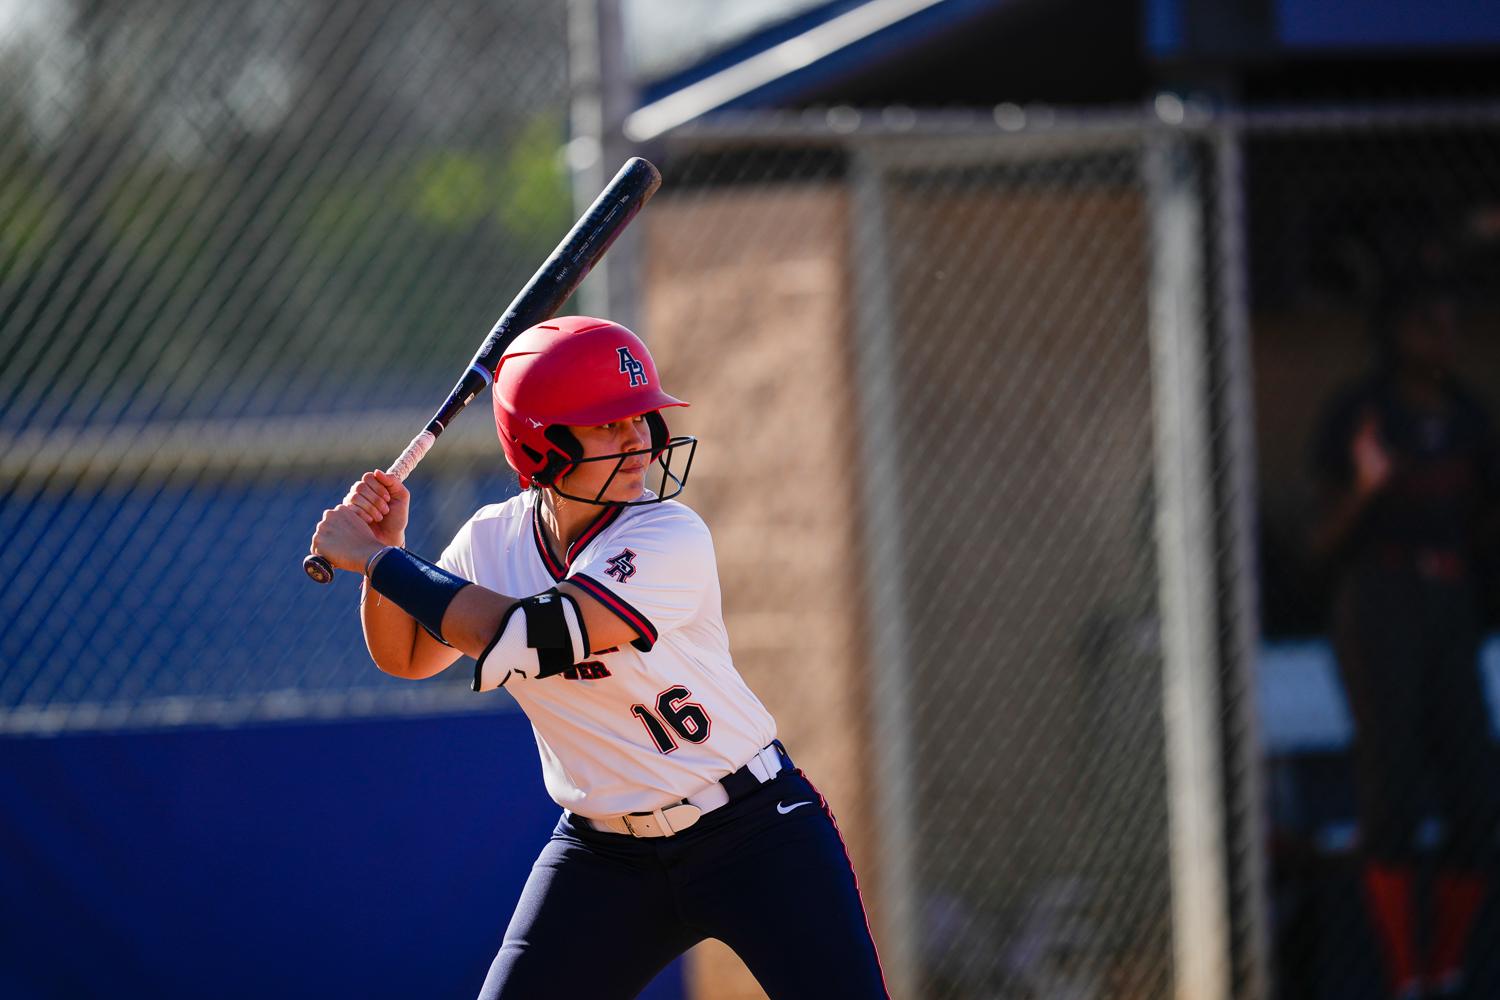 Softball Bats Come to Life in Blowout of Lassen College